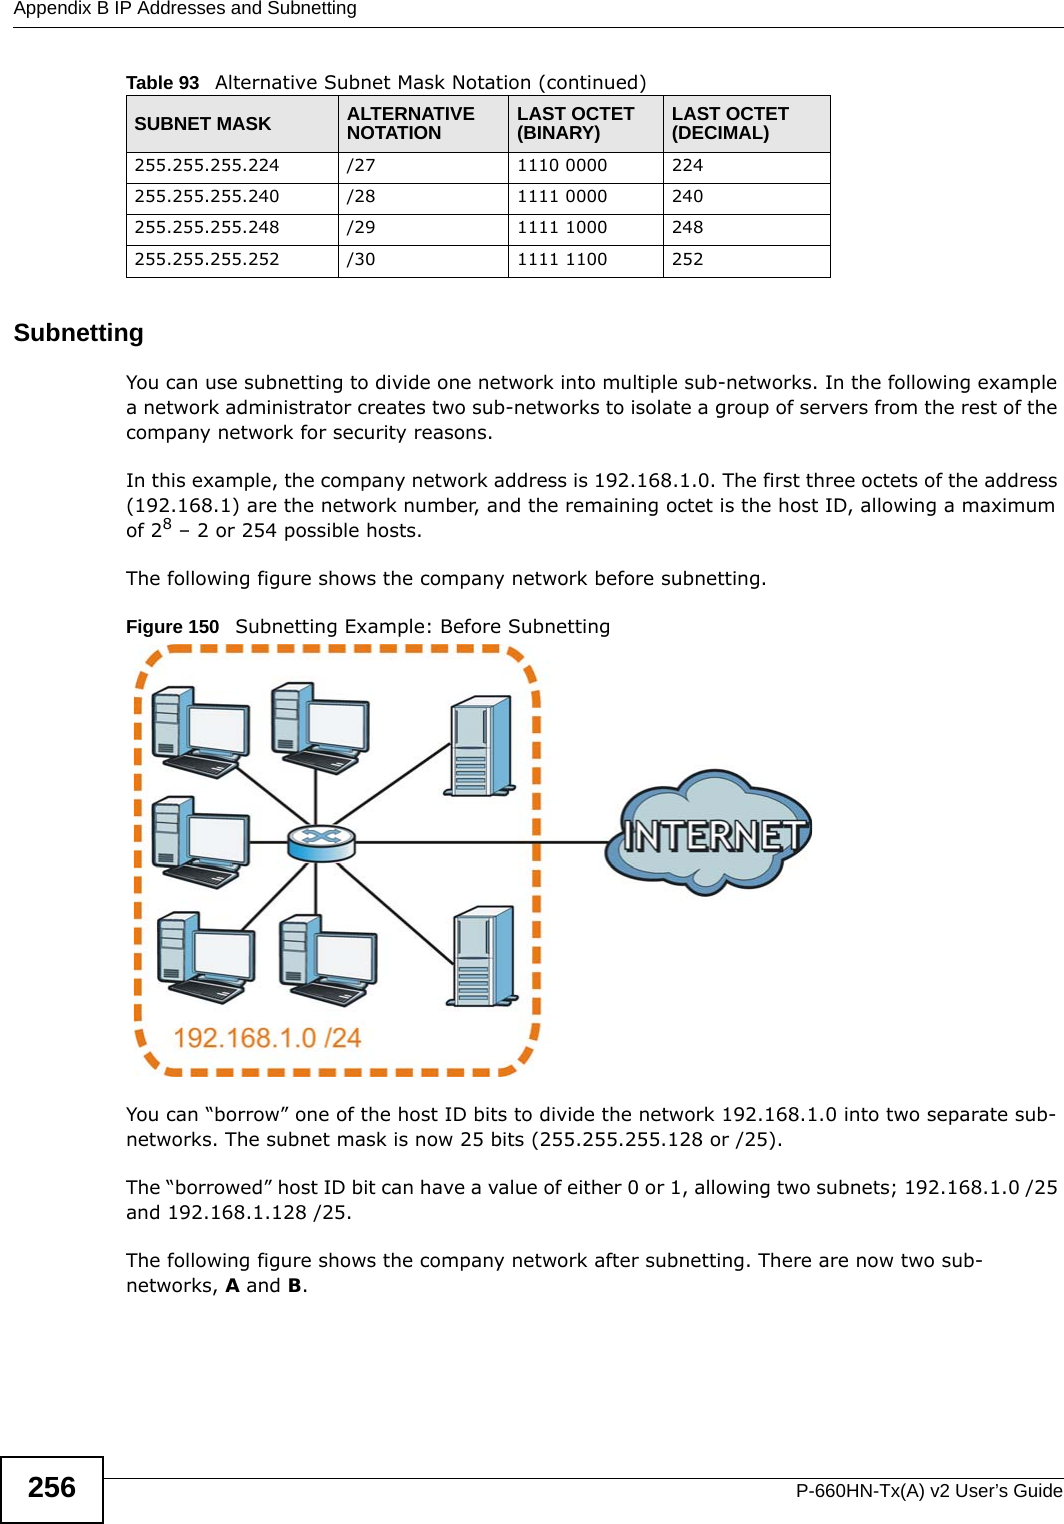 Appendix B IP Addresses and SubnettingP-660HN-Tx(A) v2 User’s Guide256SubnettingYou can use subnetting to divide one network into multiple sub-networks. In the following example a network administrator creates two sub-networks to isolate a group of servers from the rest of the company network for security reasons.In this example, the company network address is 192.168.1.0. The first three octets of the address (192.168.1) are the network number, and the remaining octet is the host ID, allowing a maximum of 28 – 2 or 254 possible hosts.The following figure shows the company network before subnetting.  Figure 150   Subnetting Example: Before SubnettingYou can “borrow” one of the host ID bits to divide the network 192.168.1.0 into two separate sub-networks. The subnet mask is now 25 bits (255.255.255.128 or /25).The “borrowed” host ID bit can have a value of either 0 or 1, allowing two subnets; 192.168.1.0 /25 and 192.168.1.128 /25. The following figure shows the company network after subnetting. There are now two sub-networks, A and B. 255.255.255.224 /27 1110 0000 224255.255.255.240 /28 1111 0000 240255.255.255.248 /29 1111 1000 248255.255.255.252 /30 1111 1100 252Table 93   Alternative Subnet Mask Notation (continued)SUBNET MASK ALTERNATIVE NOTATION LAST OCTET (BINARY) LAST OCTET (DECIMAL)